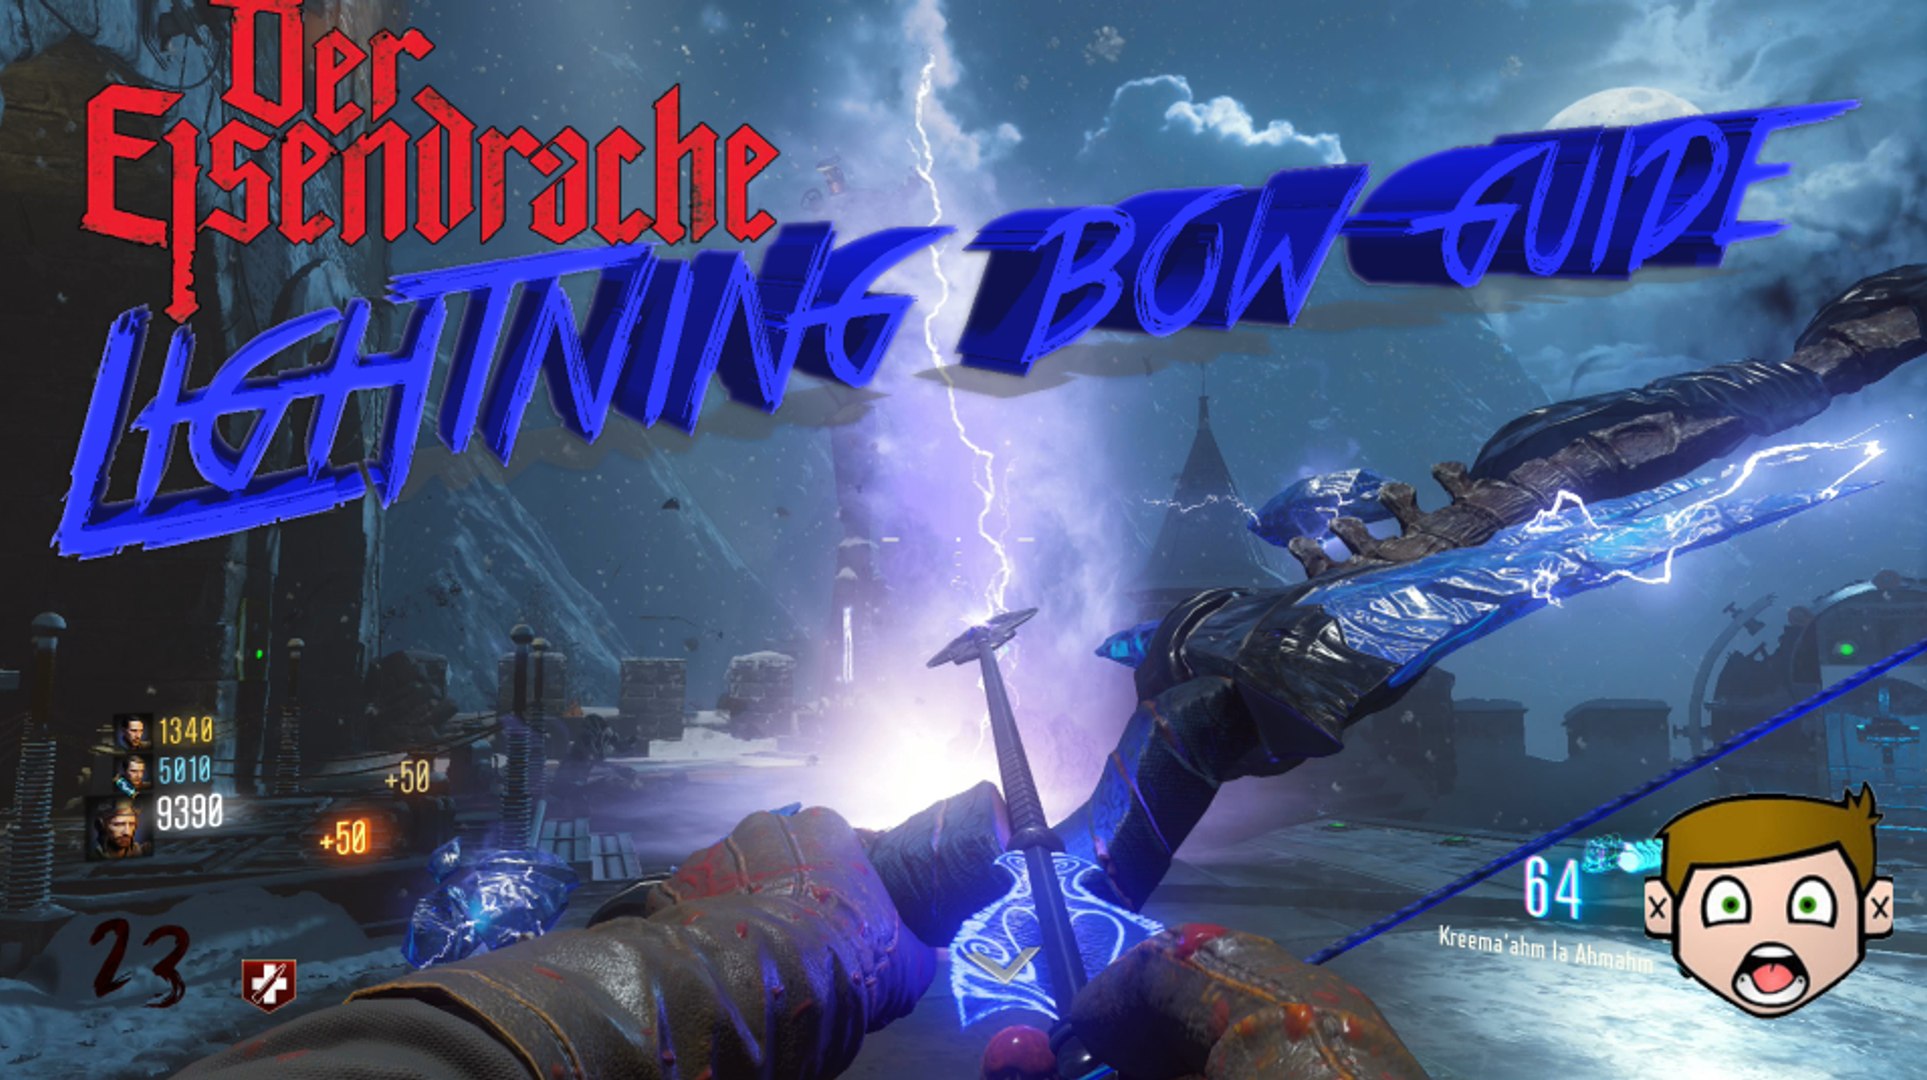 Lightning Bow Guide [Easy] - Black Ops 3 Zombies Der Eisendrache - video  Dailymotion